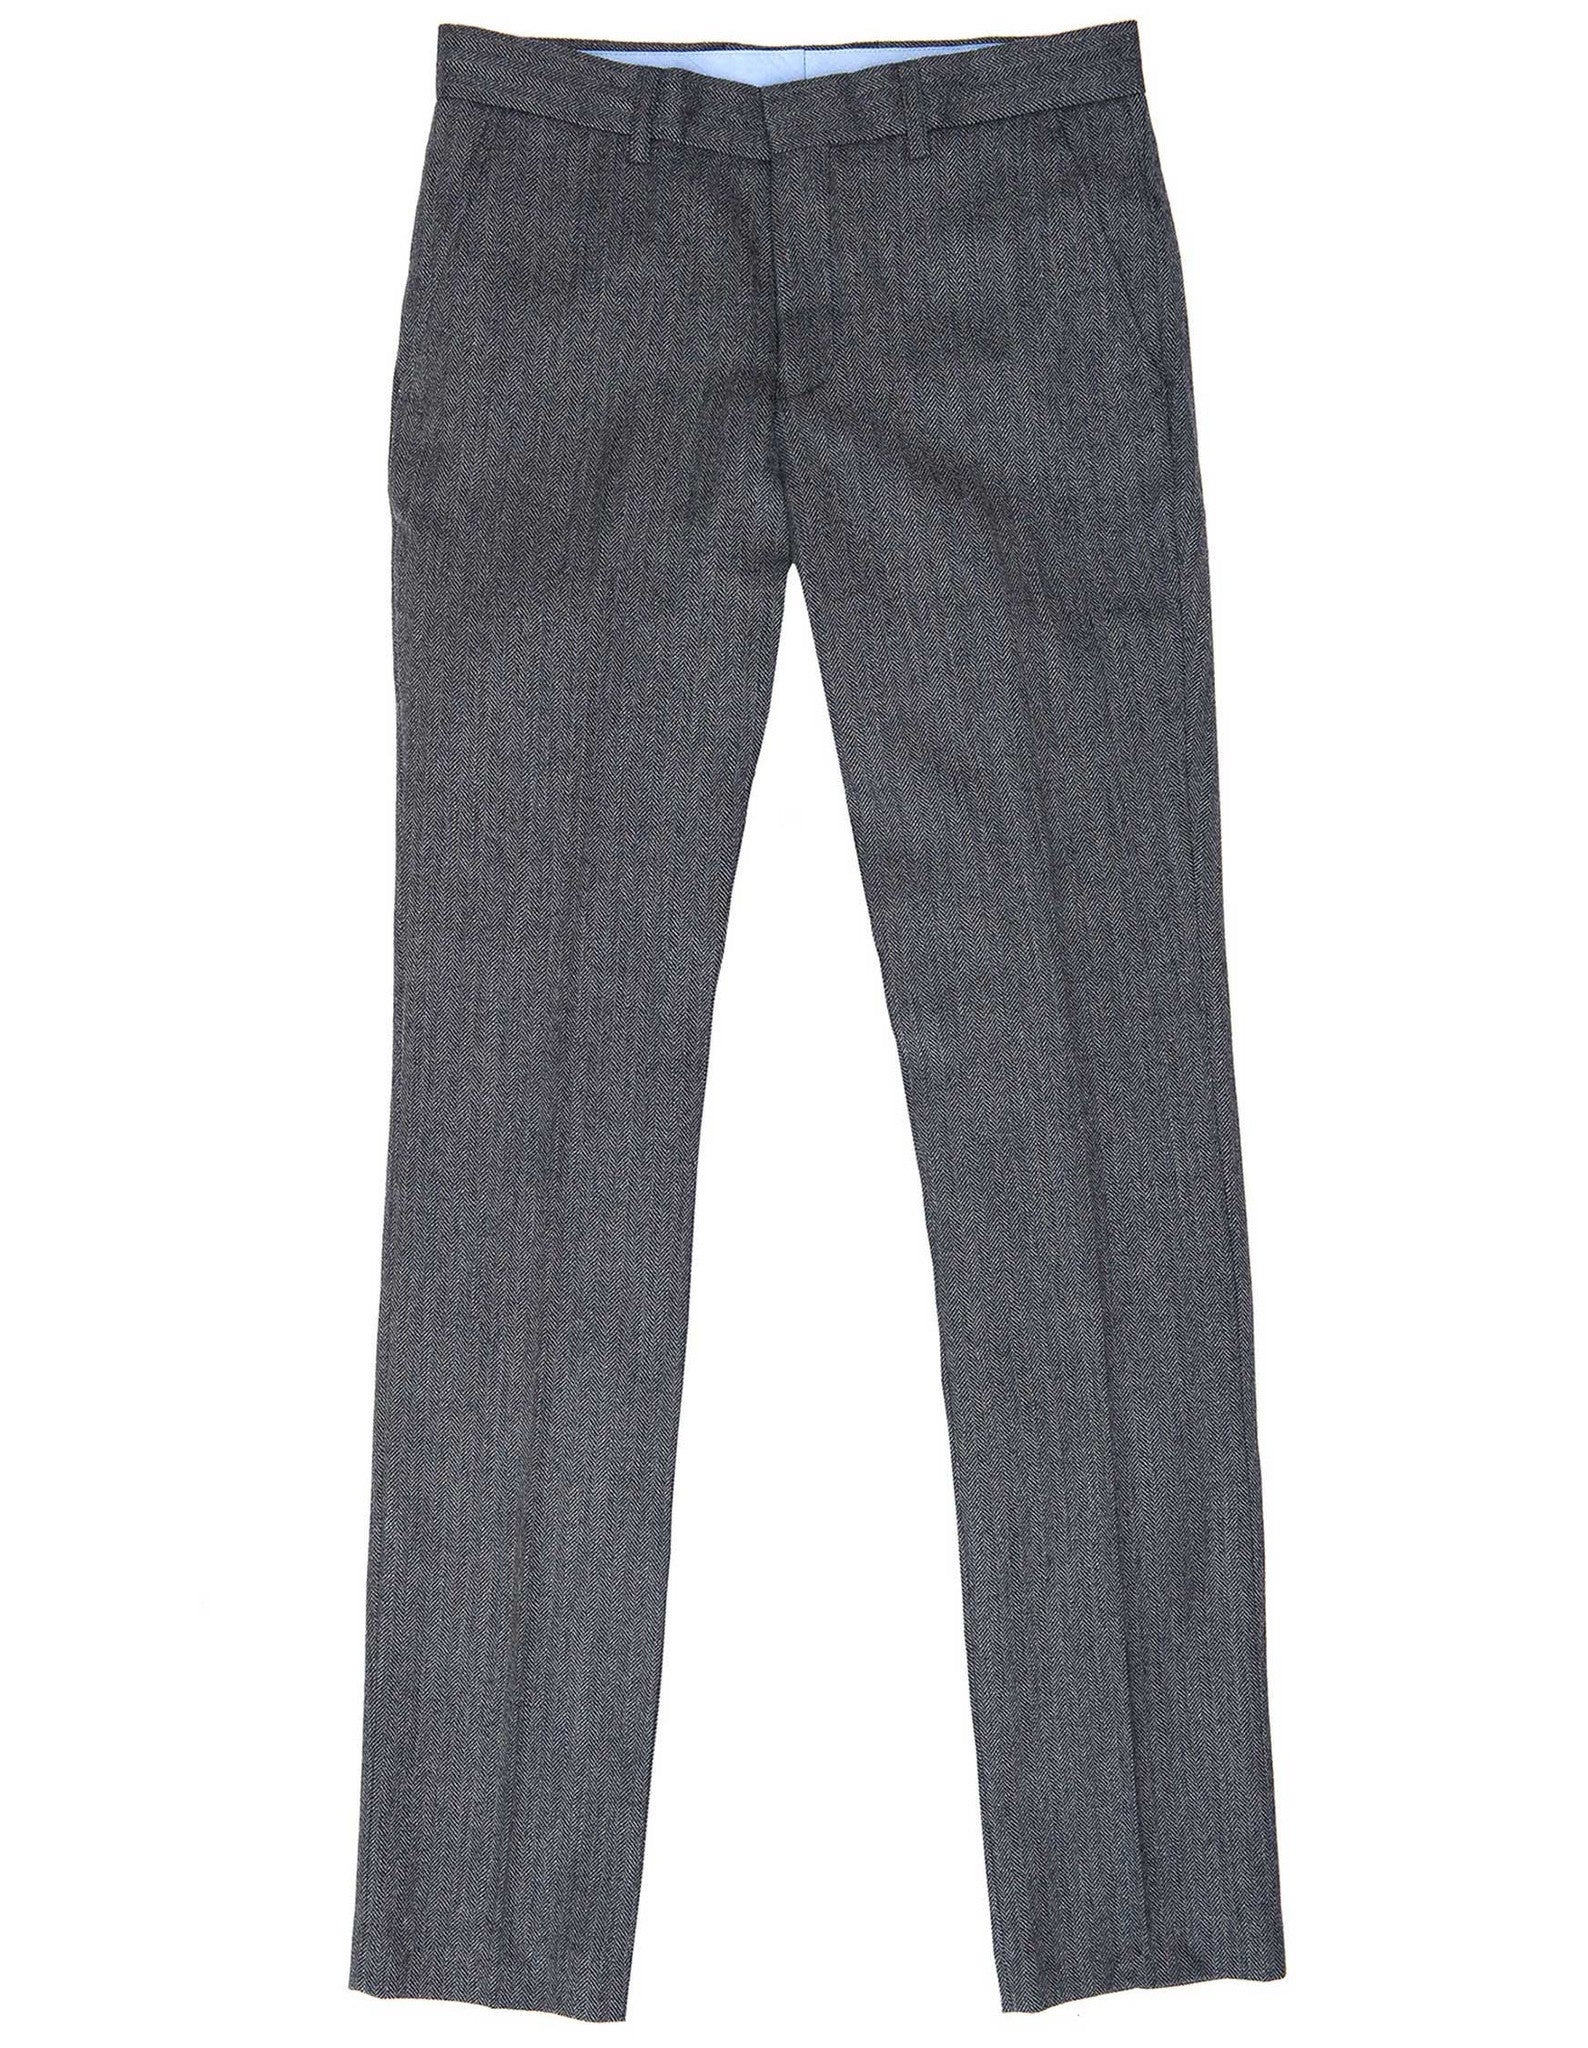 Light Grey Check Full Length Business Casual Men Brooklyn Fit Trousers -  Selling Fast at Pantaloons.com